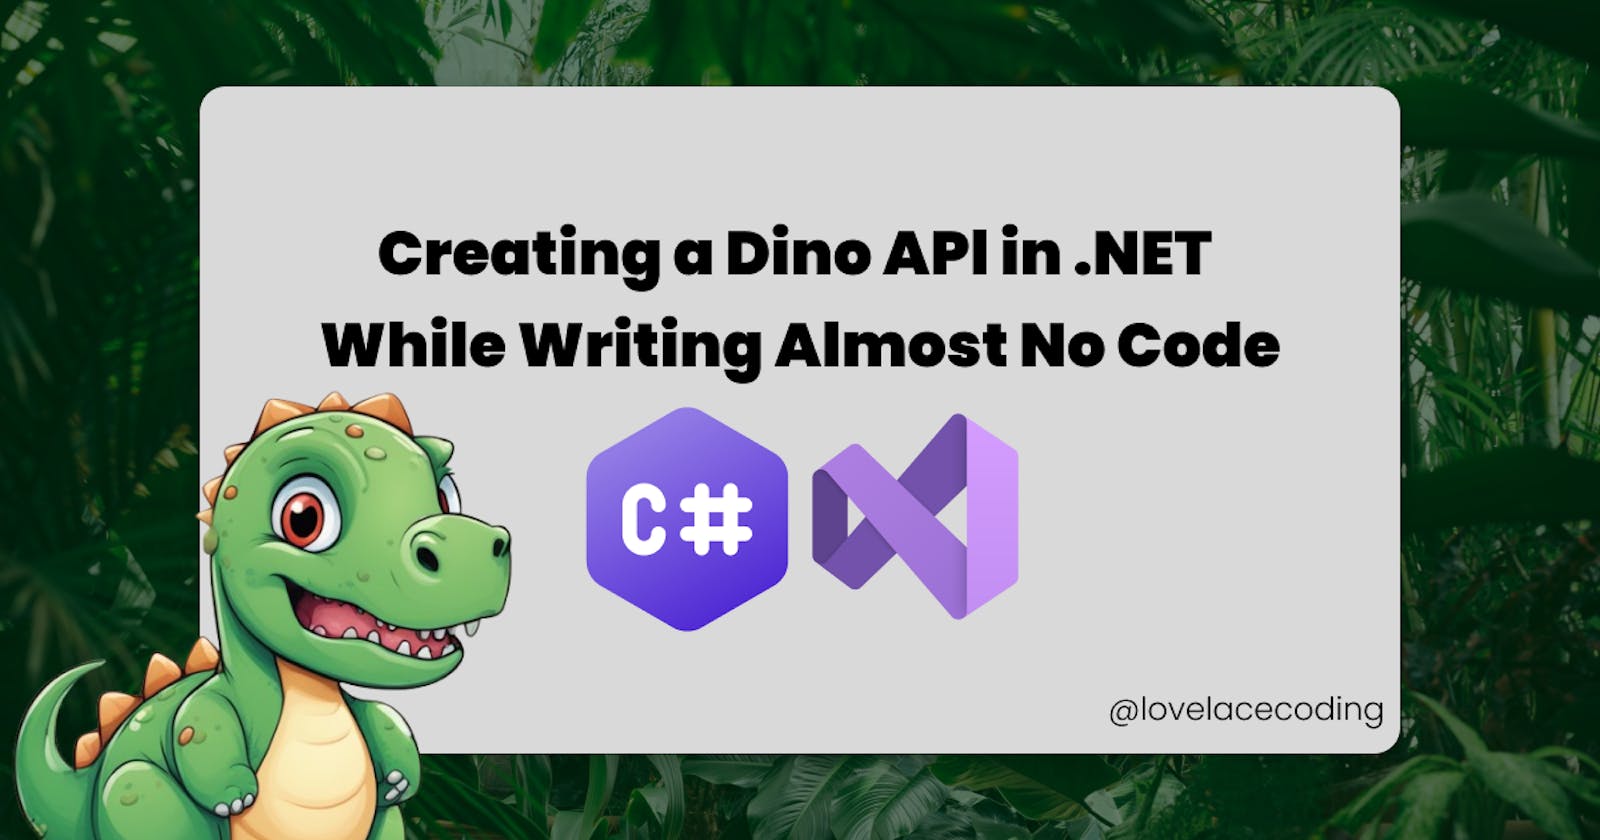 Creating a Dino API in .NET While Writing Almost No Code